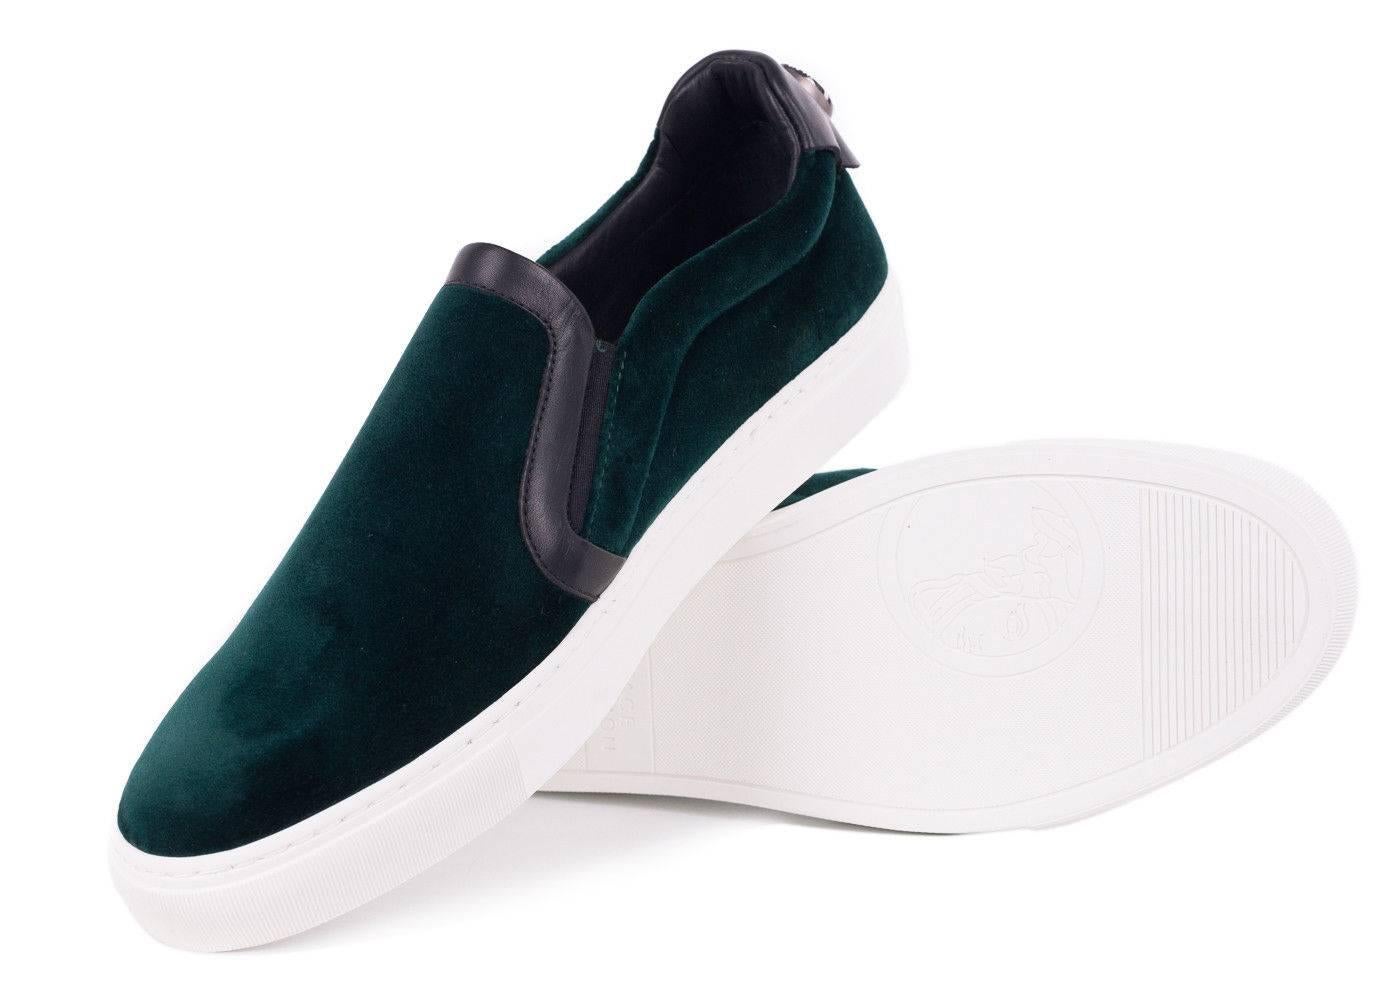 The man of the hour arrives in the Velvet Versace Slip On Sneakers. This work of art features rich emerald green velvet, black leather trimming, and a casually complimenting white rubber sole. Pair these shoes with the pants of the season in plaid